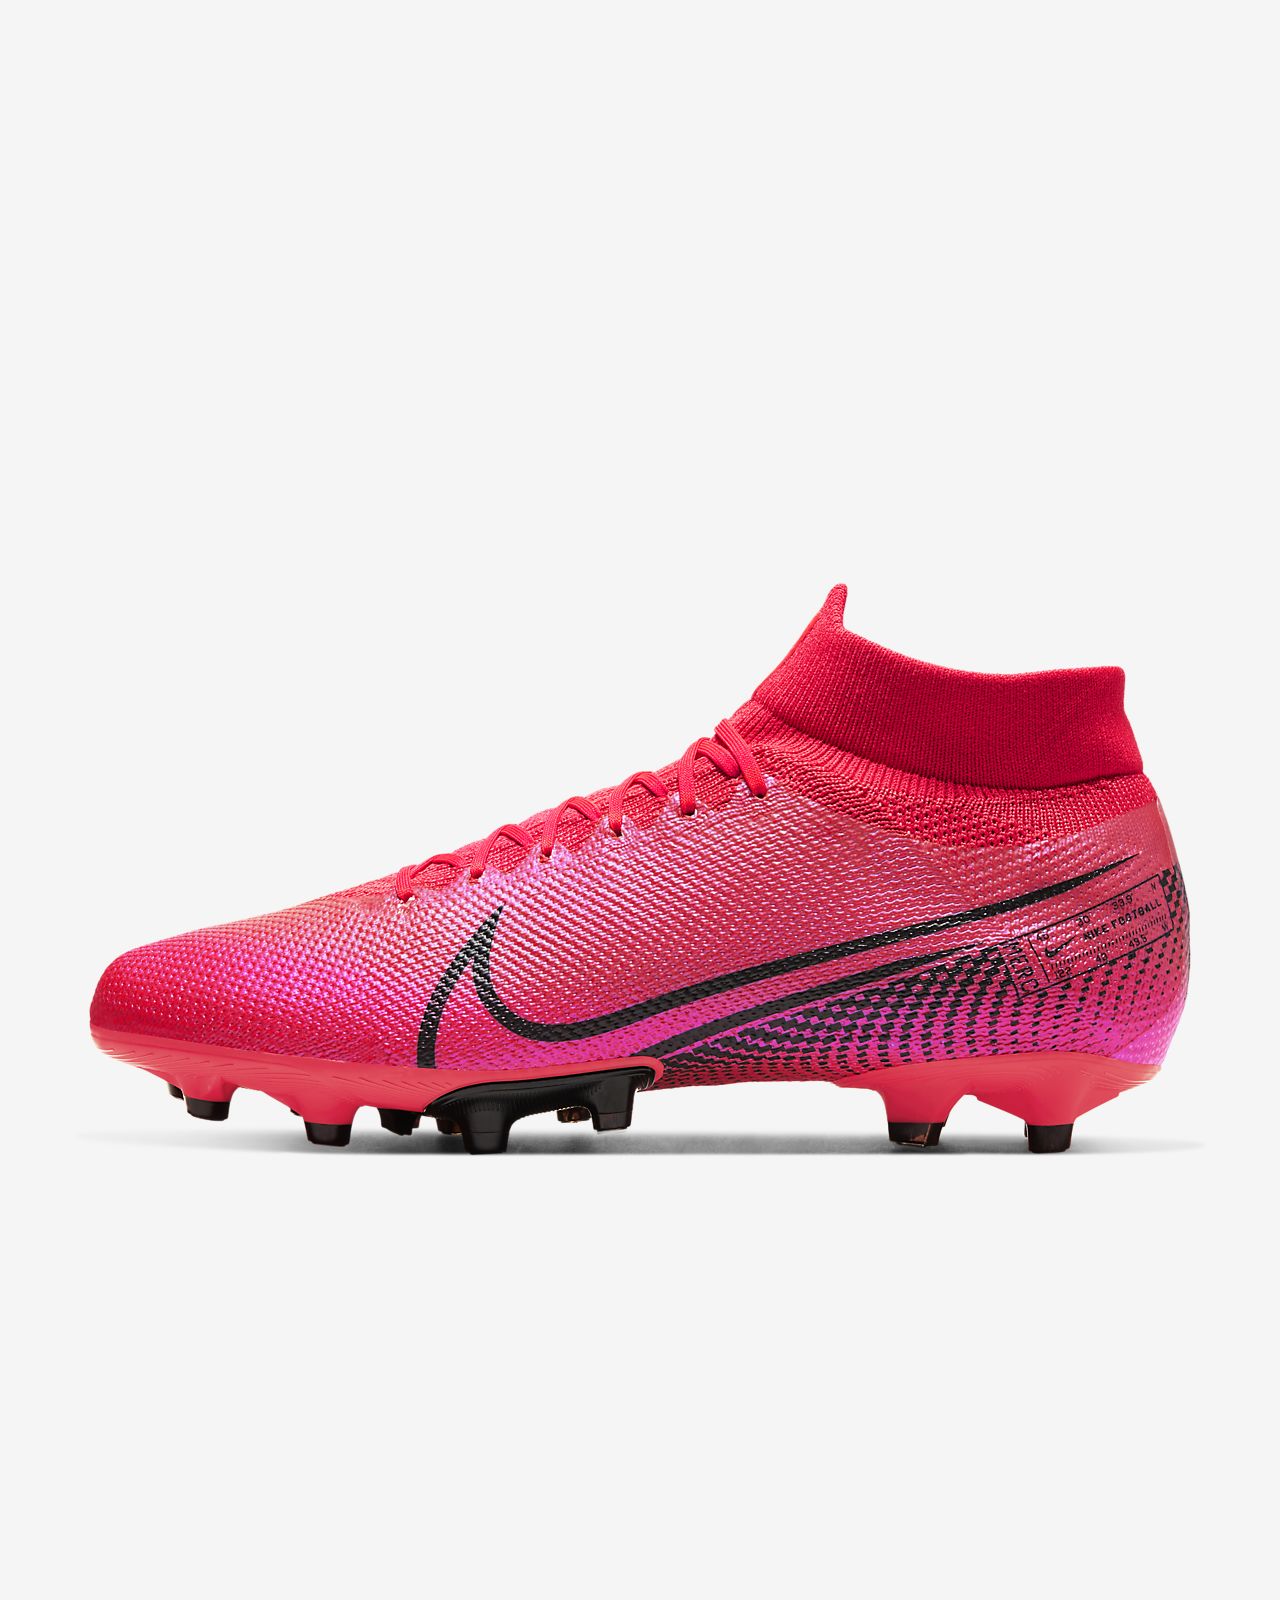 Nike Mercurial Superfly 7 Pro Ag Pro Artificial Grass Football